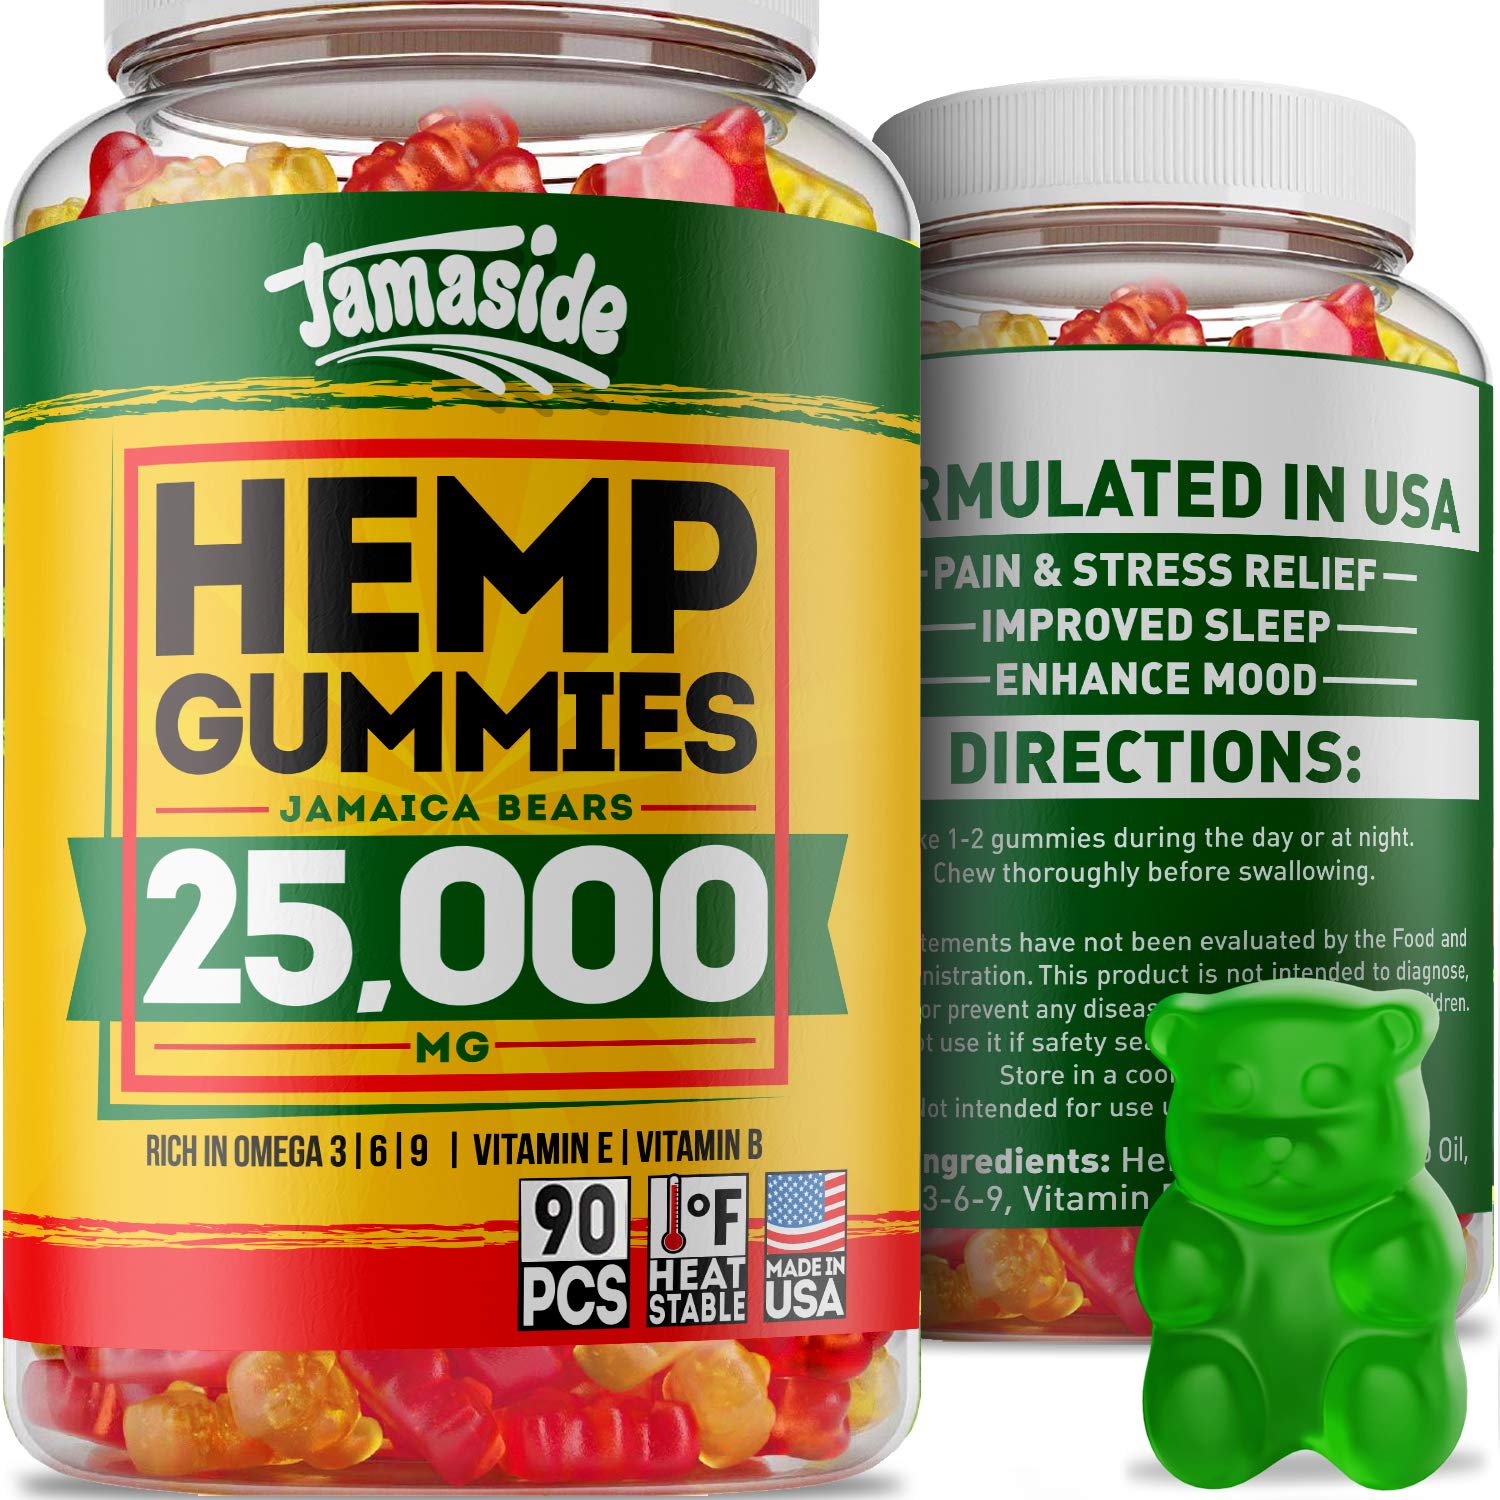 Review of Hemp Gummies 25000 MG - Made in USA - 277 MG Hemp - Anxiety & Stress Relief, by Jamaside